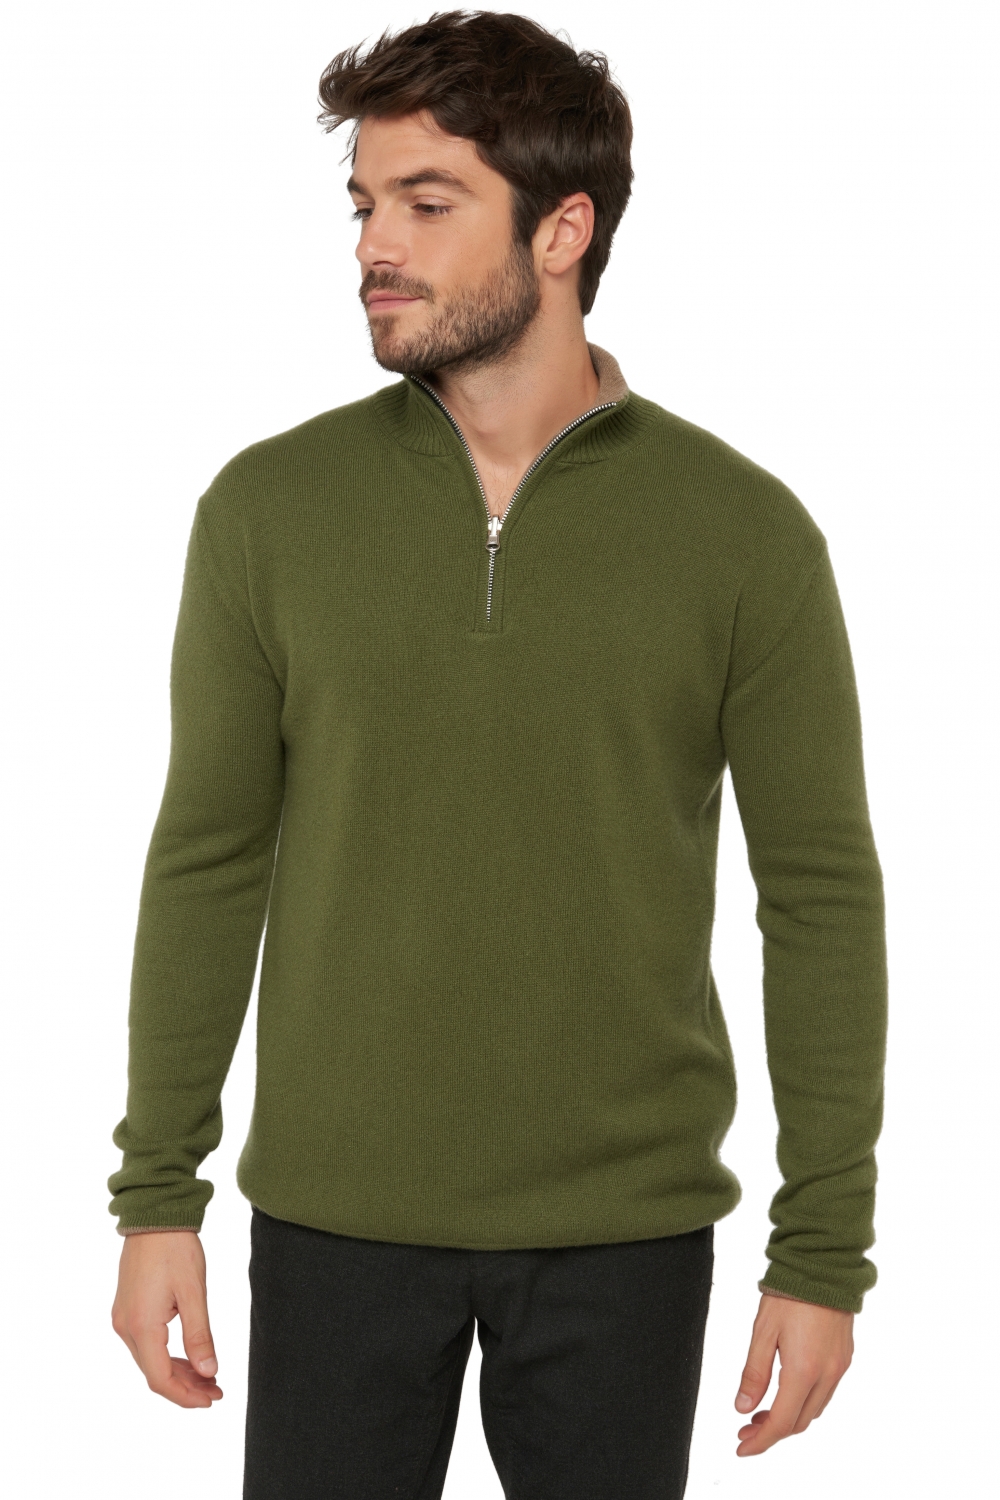 Cashmere men polo style sweaters cilio ivy green natural brown m